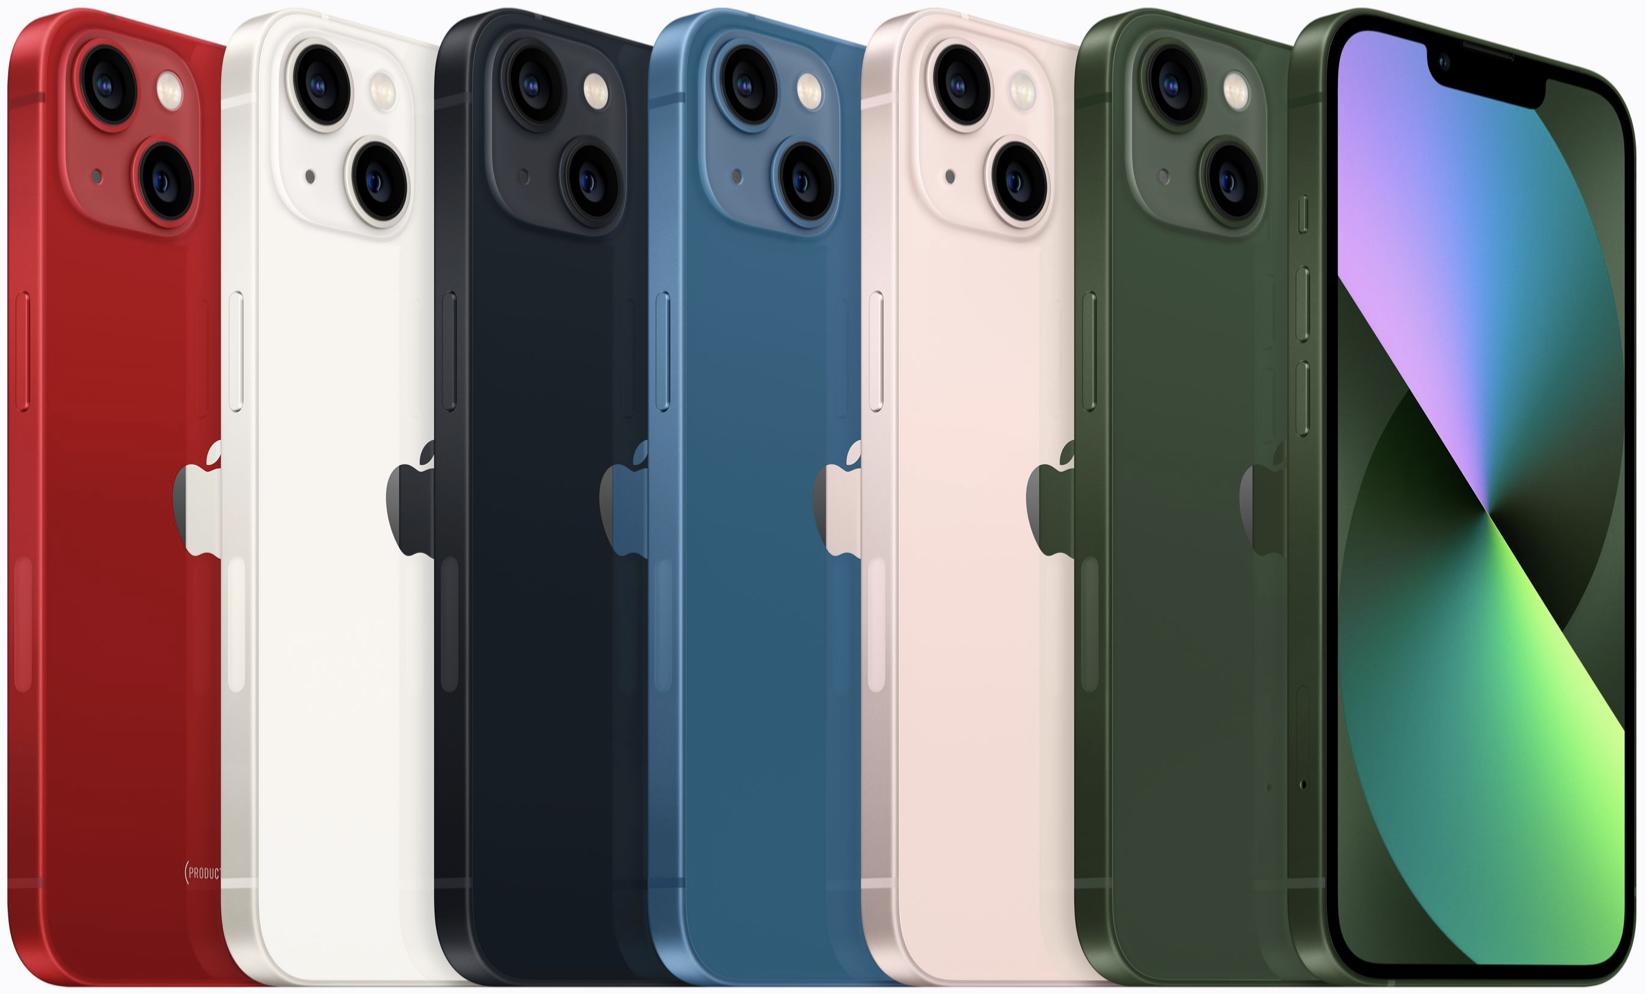 Iphone 13 Lineup All Colors 2022 Render Cropped